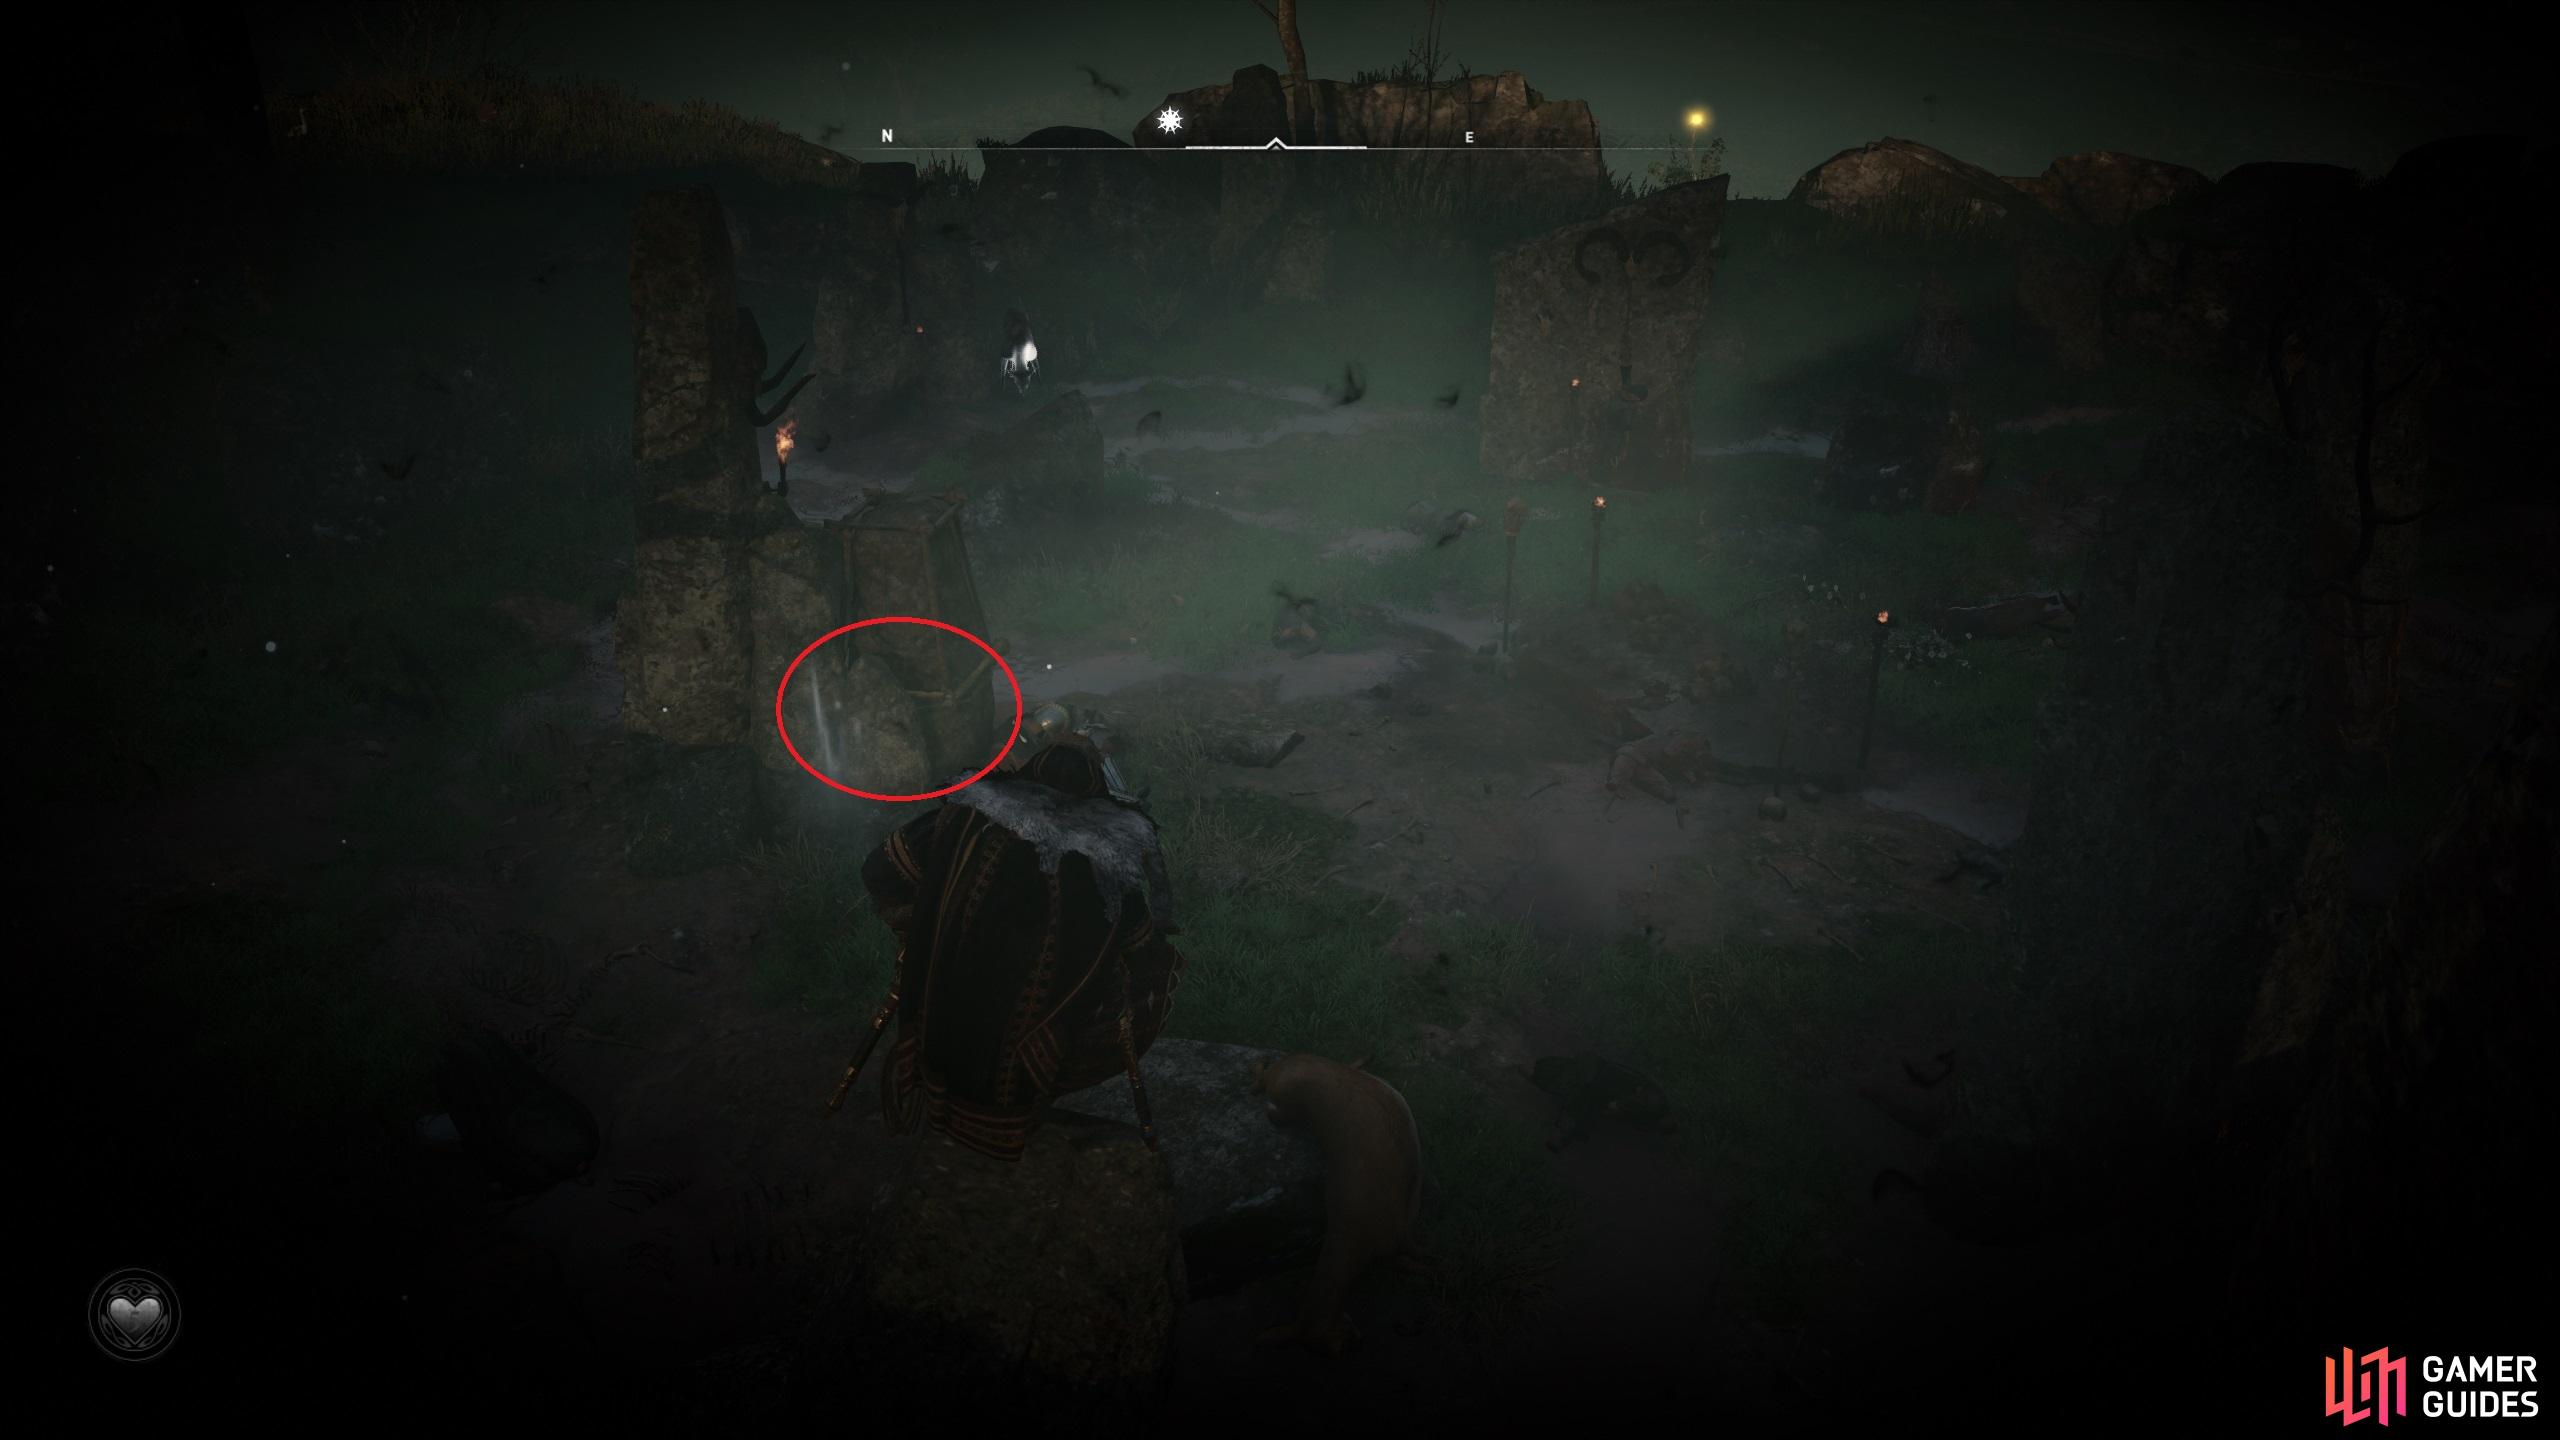 Move the stone to reveal the cursed symbol.